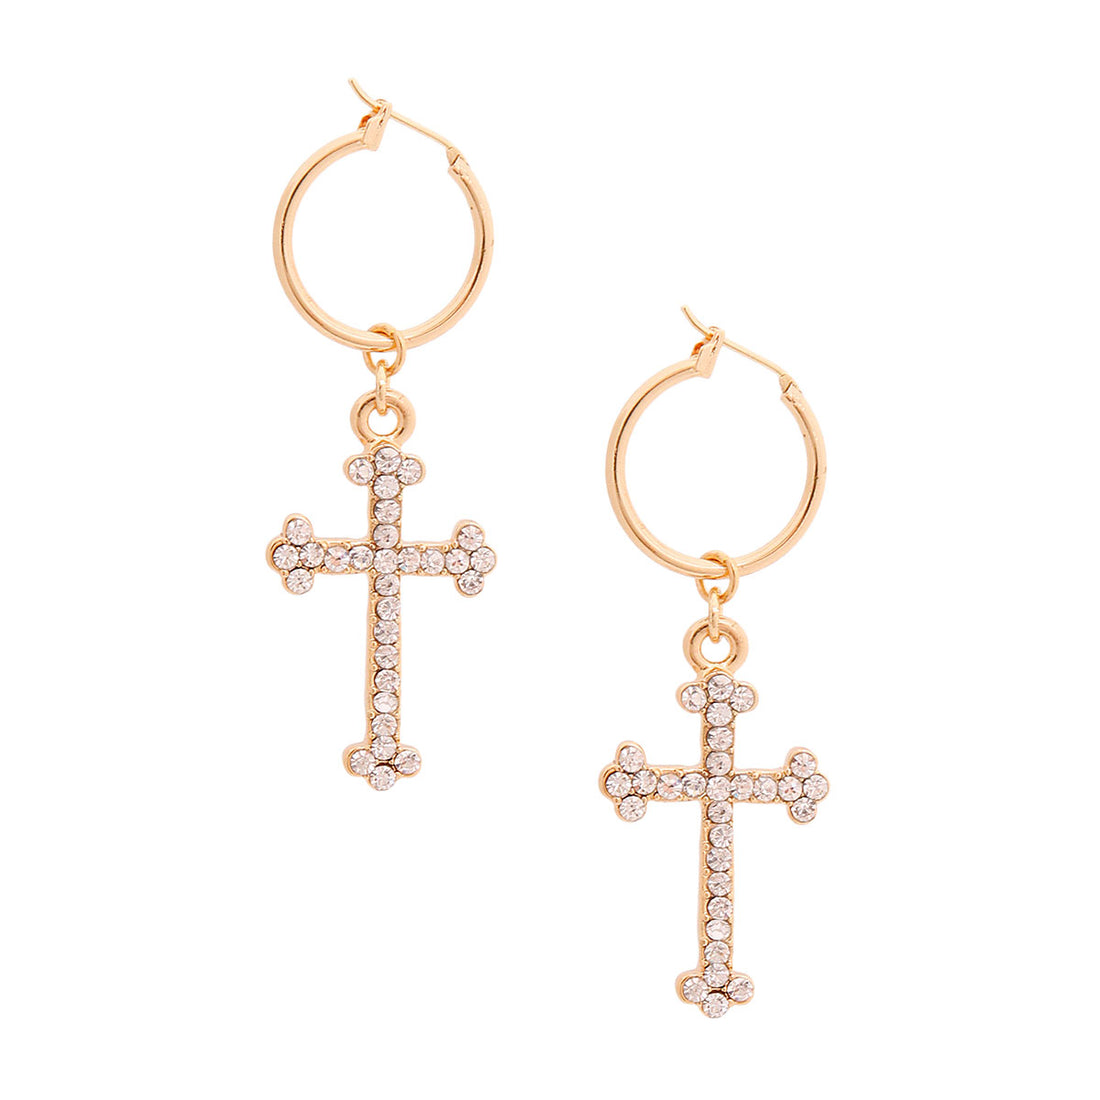 Gold Pave Cross Baby Hoops